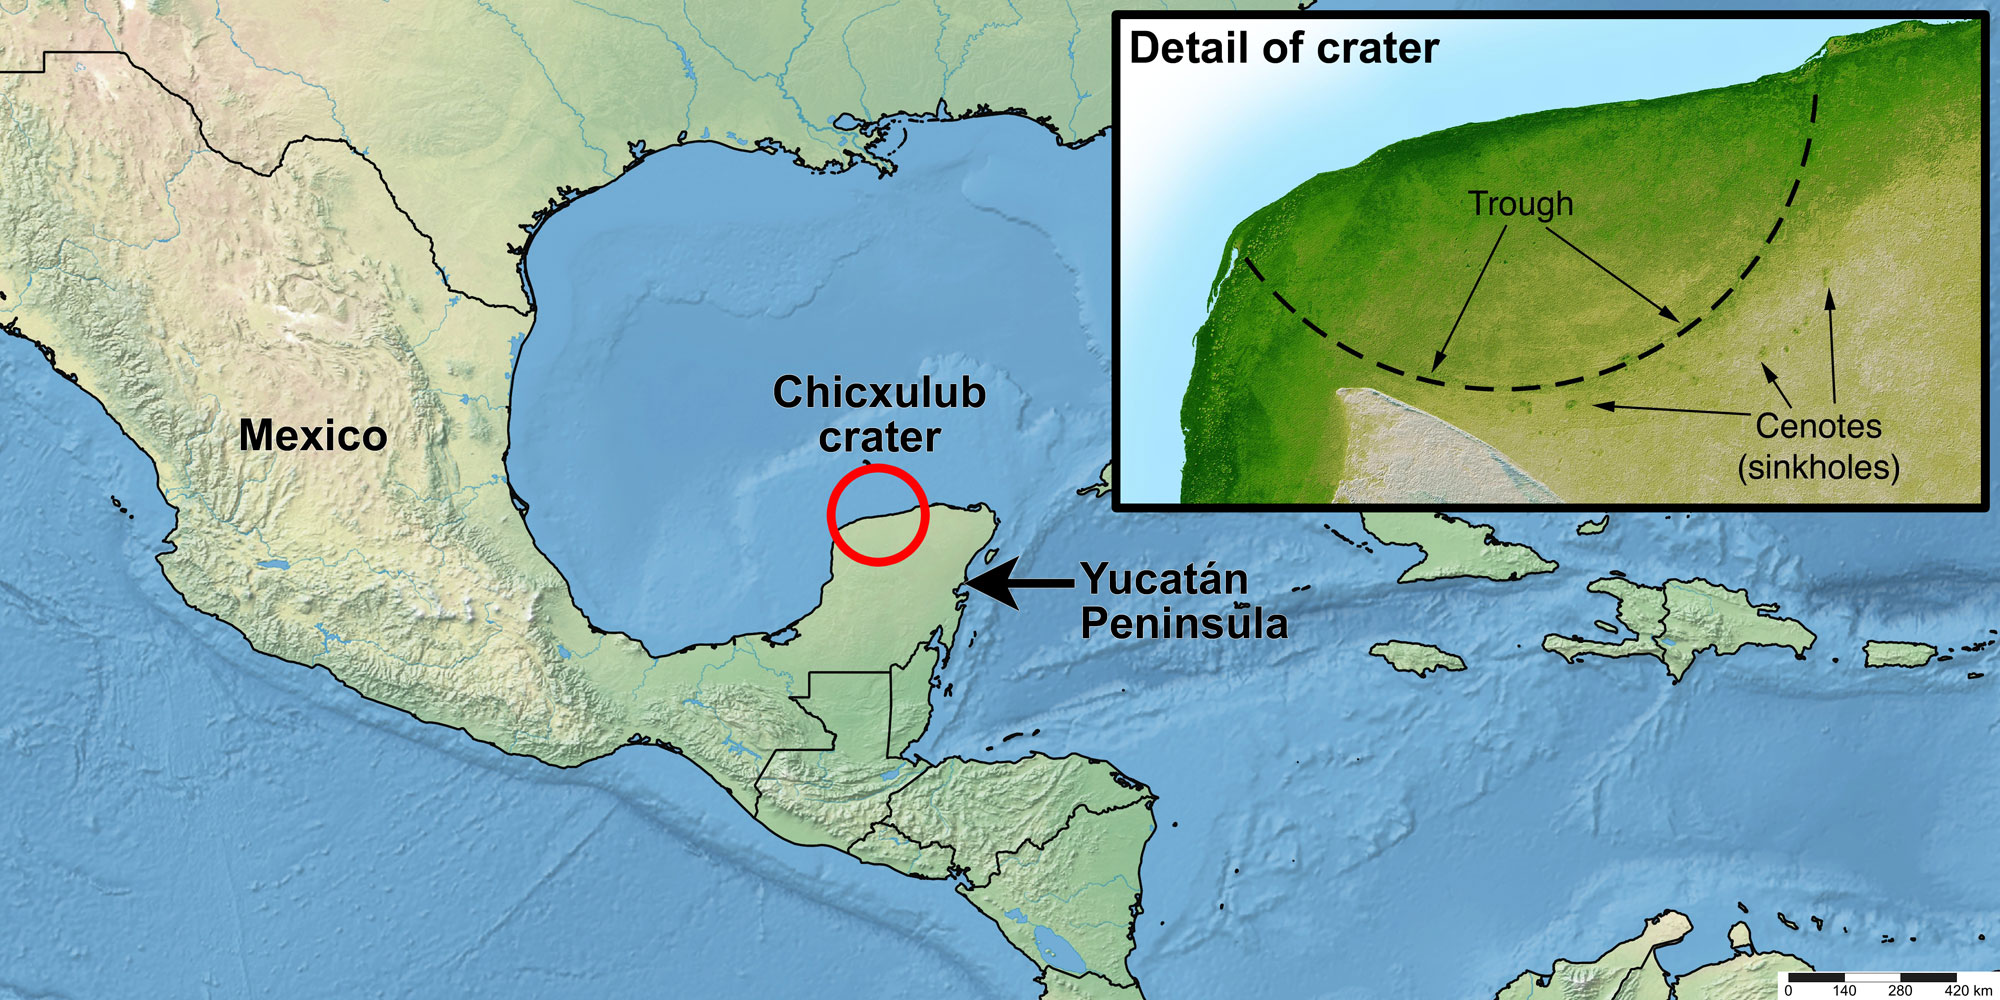 Map showing the location of the Chicxulub crater on the Yucatan Peninsula and a detail showing the edge of the crater.